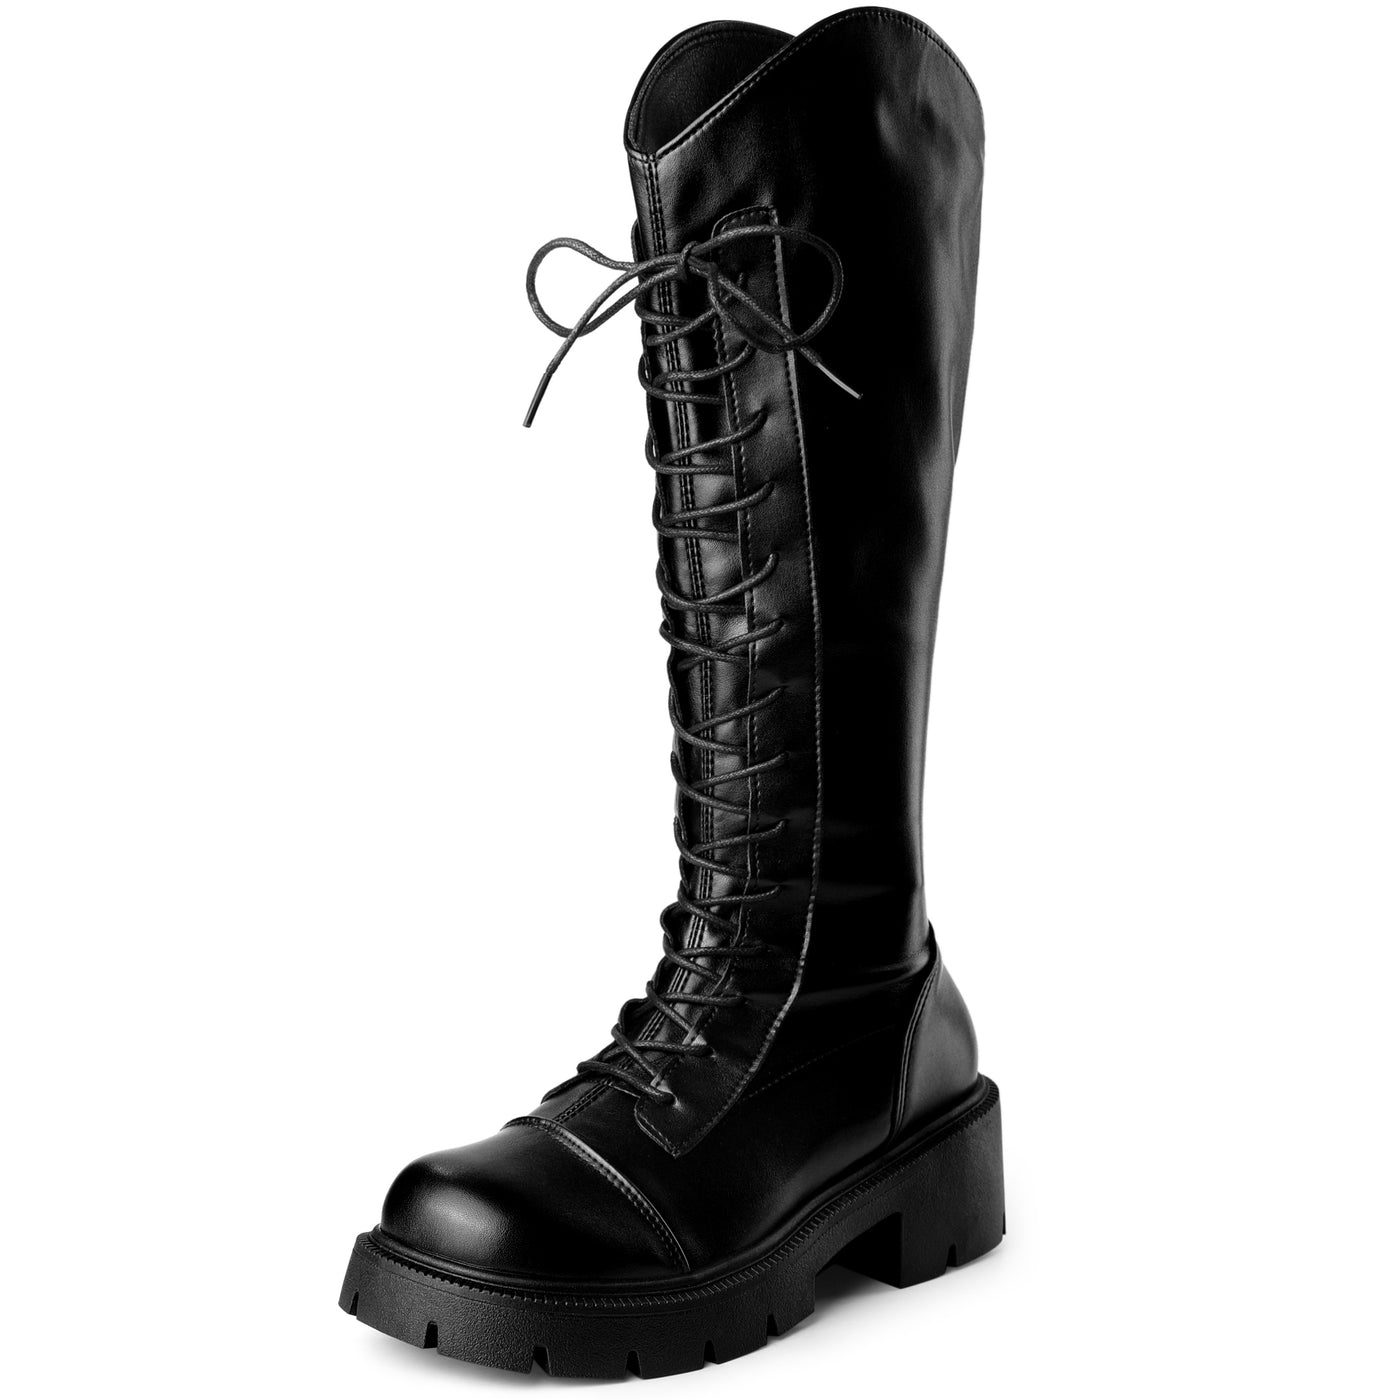 Bublédon Perphy Lace Up Round Toe Chunky Heel Knee High Boots for Women